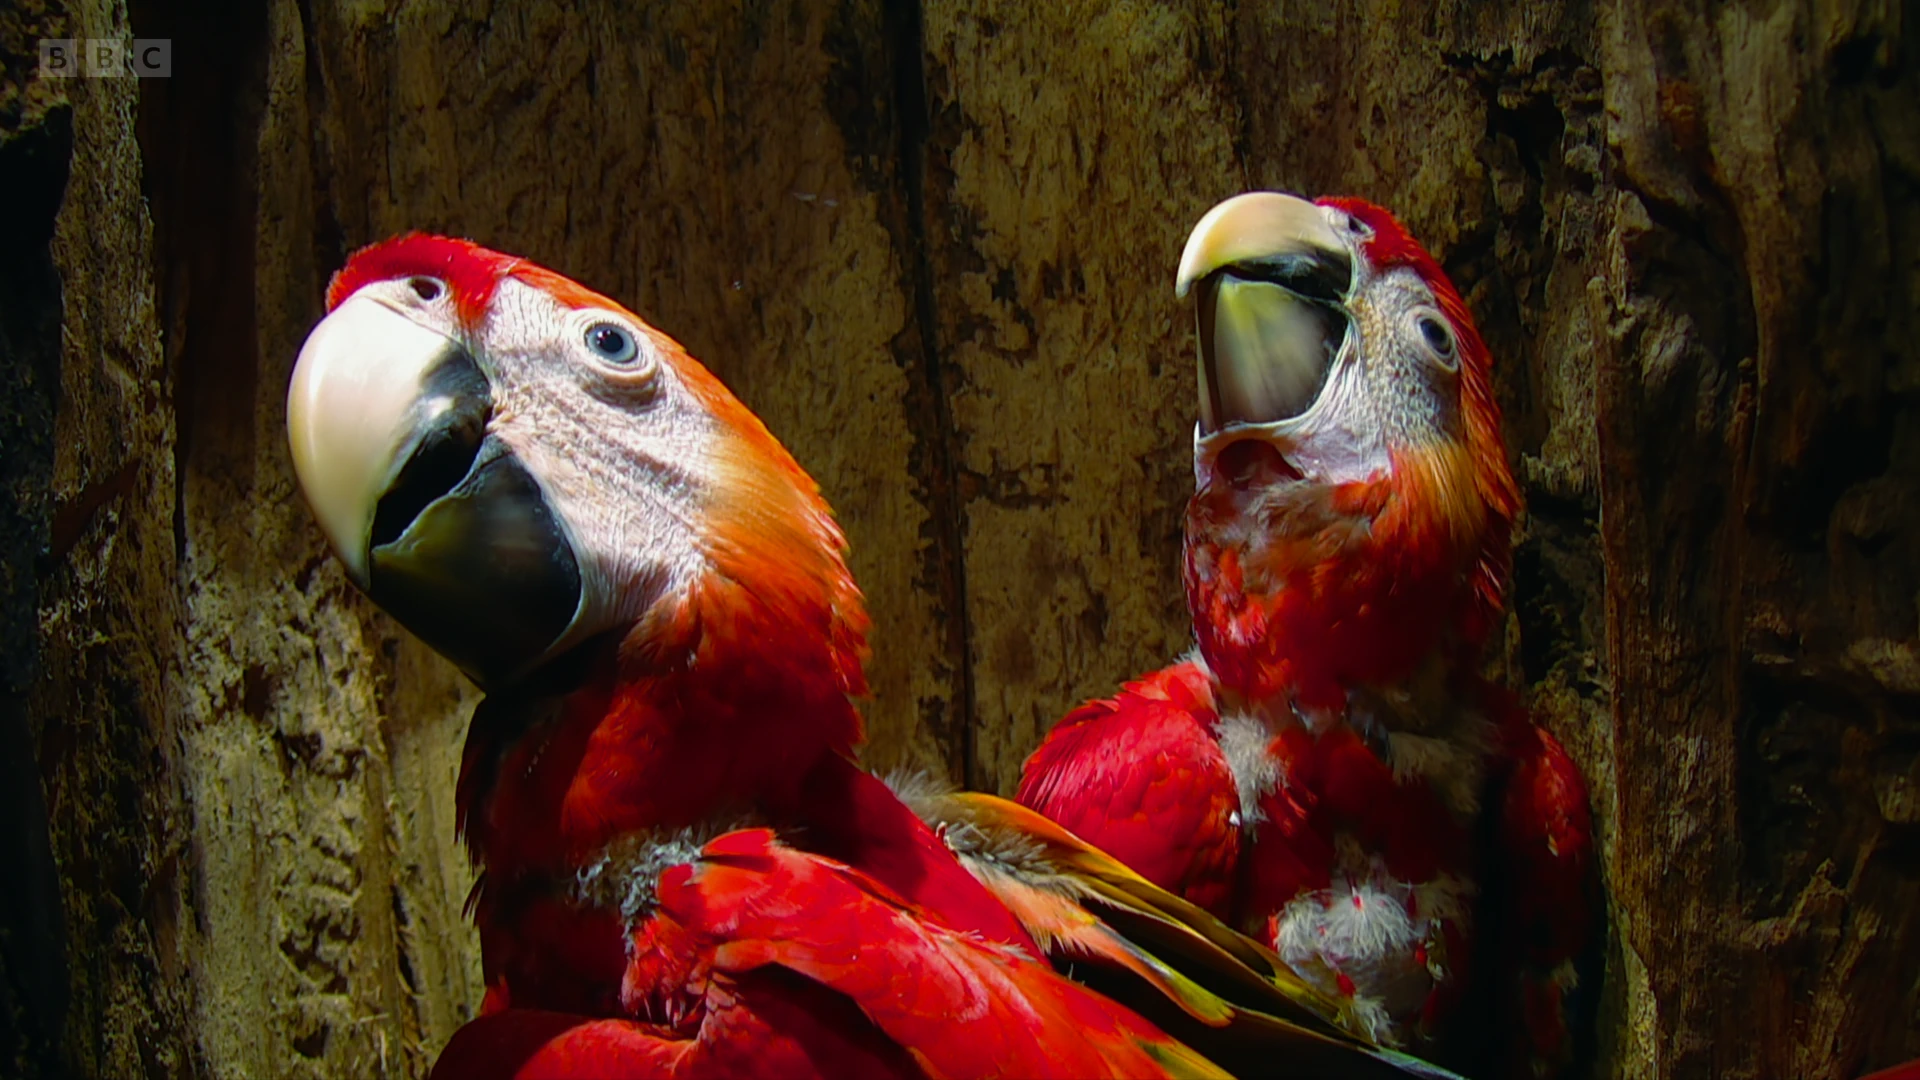 South American scarlet macaw (Ara macao macao) as shown in Seven Worlds, One Planet - South America